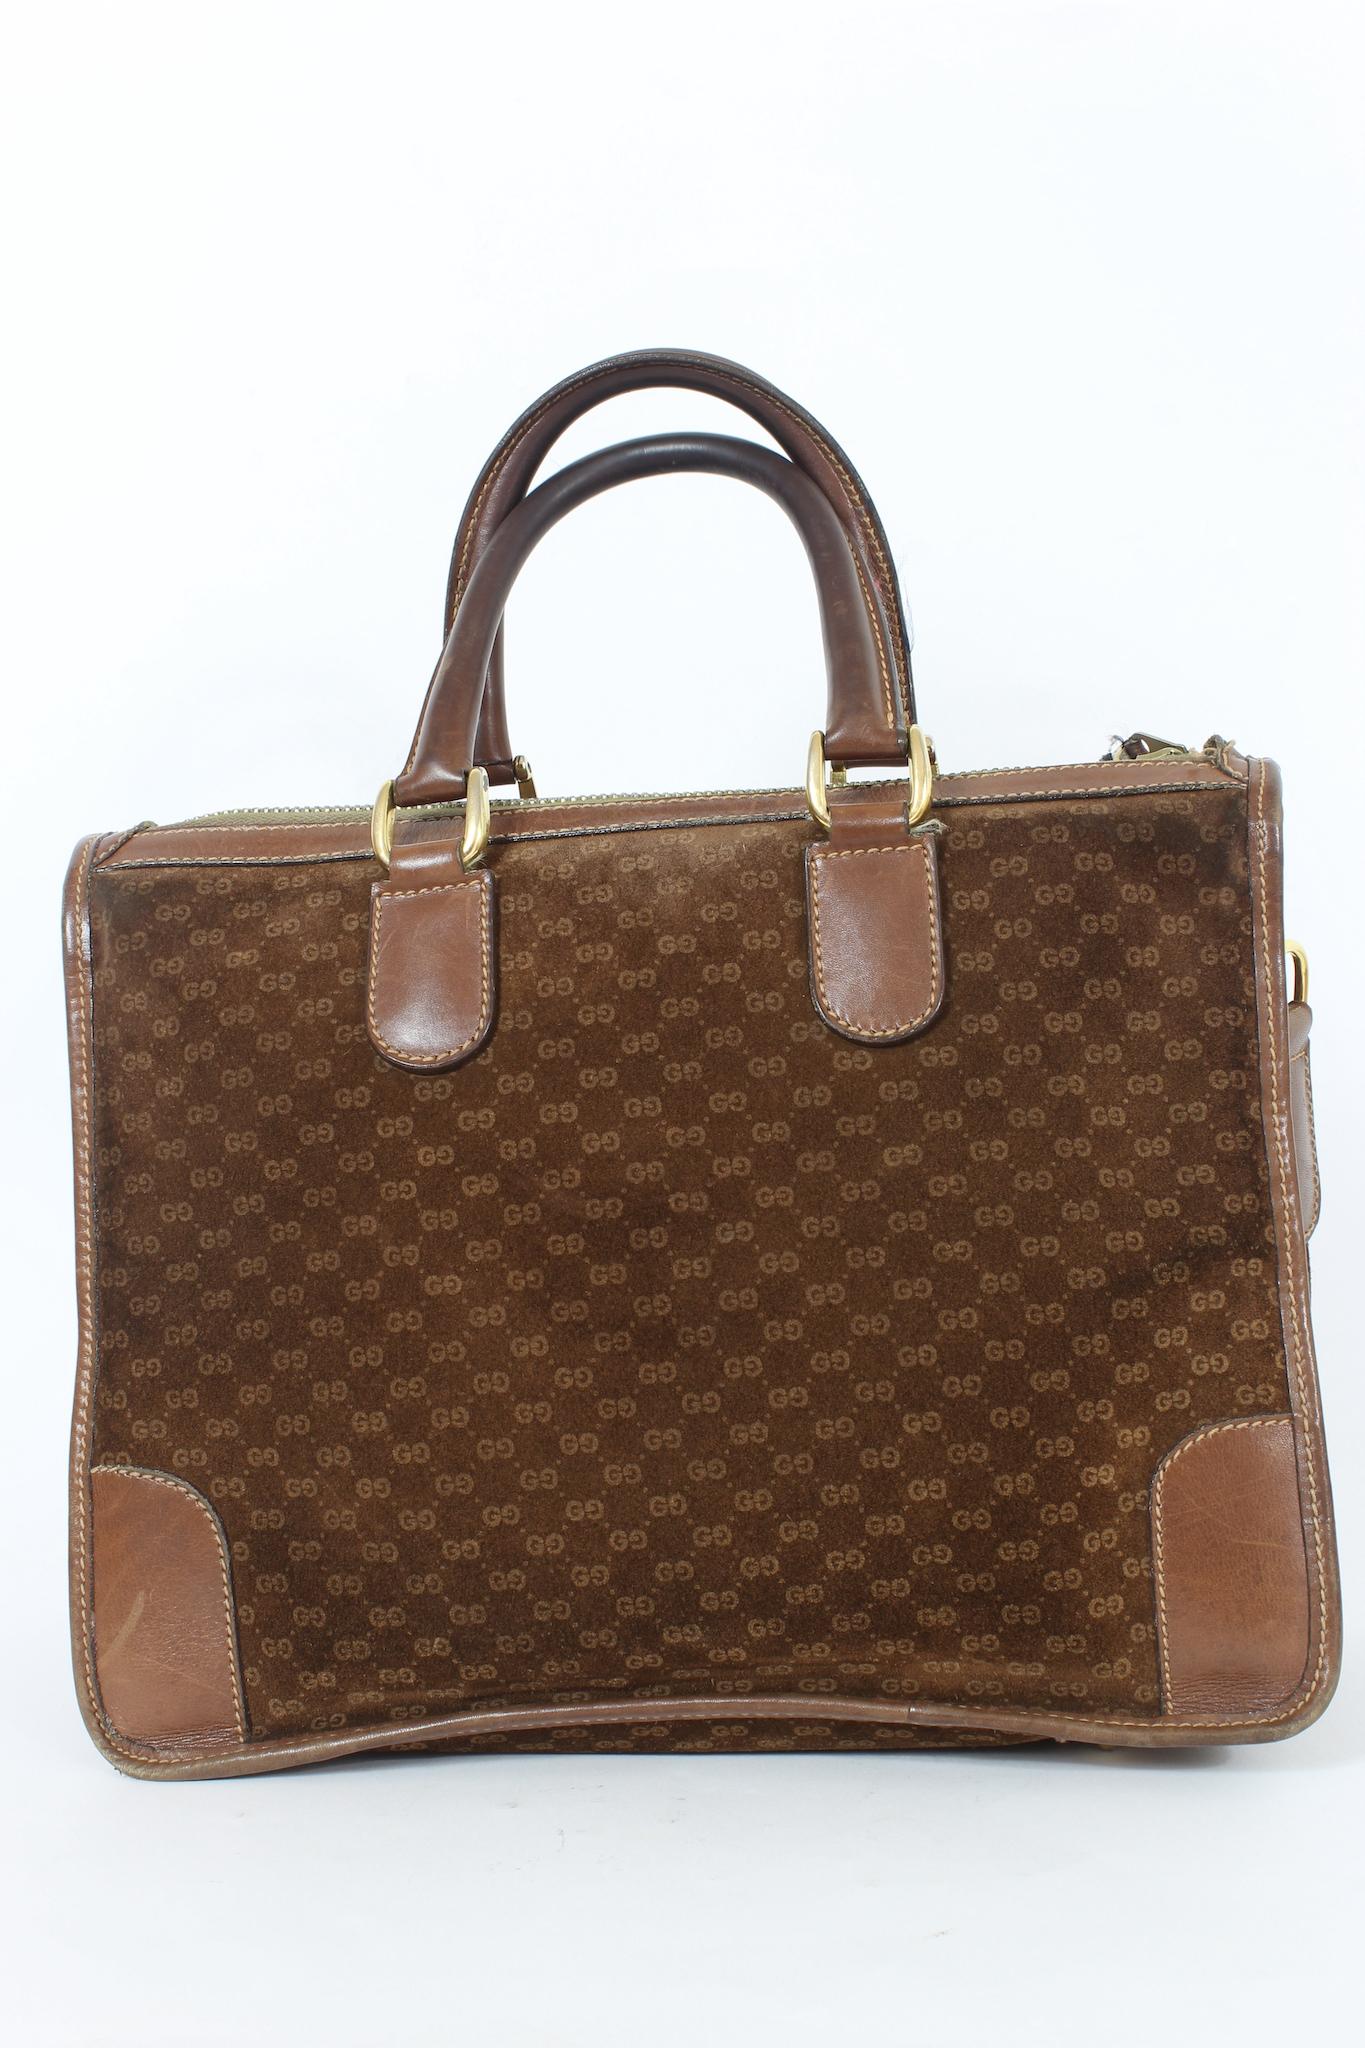 Gucci vintage 70s handbag. Brown trunk bag, in suede, monogram print, leather finishes and golden metal details. Rounded leather handles, beige suede interior with pocket. Made in italy.

Cod: 14 02 1885

Height: 25cm
Width: 32cm
Depth: